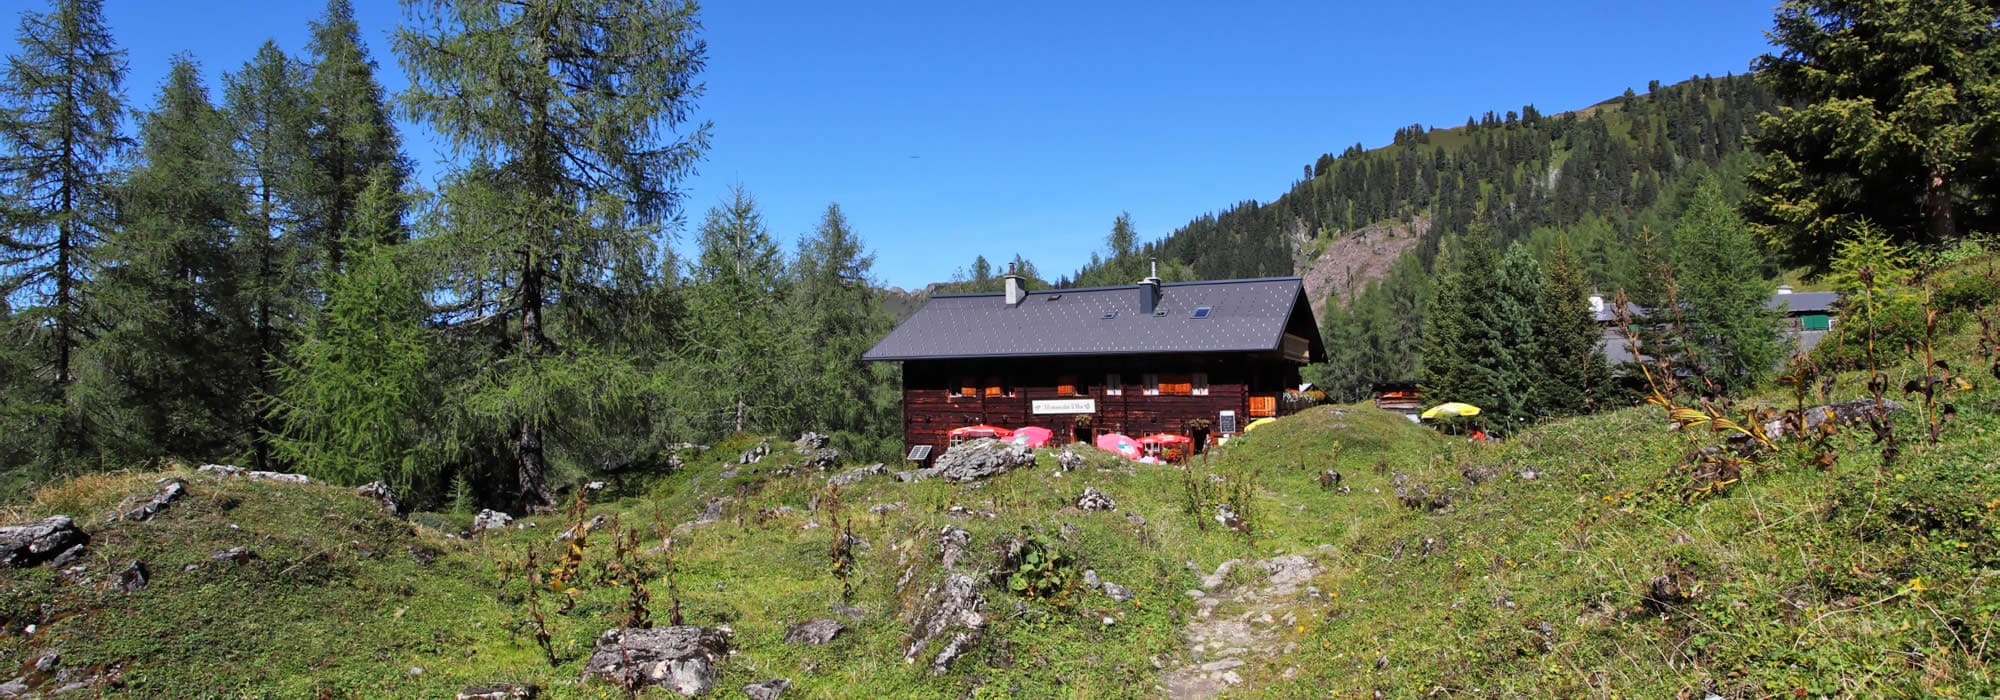 Hiking tour in the Ellmautal in Großarltal, valley of the mountain pasture huts